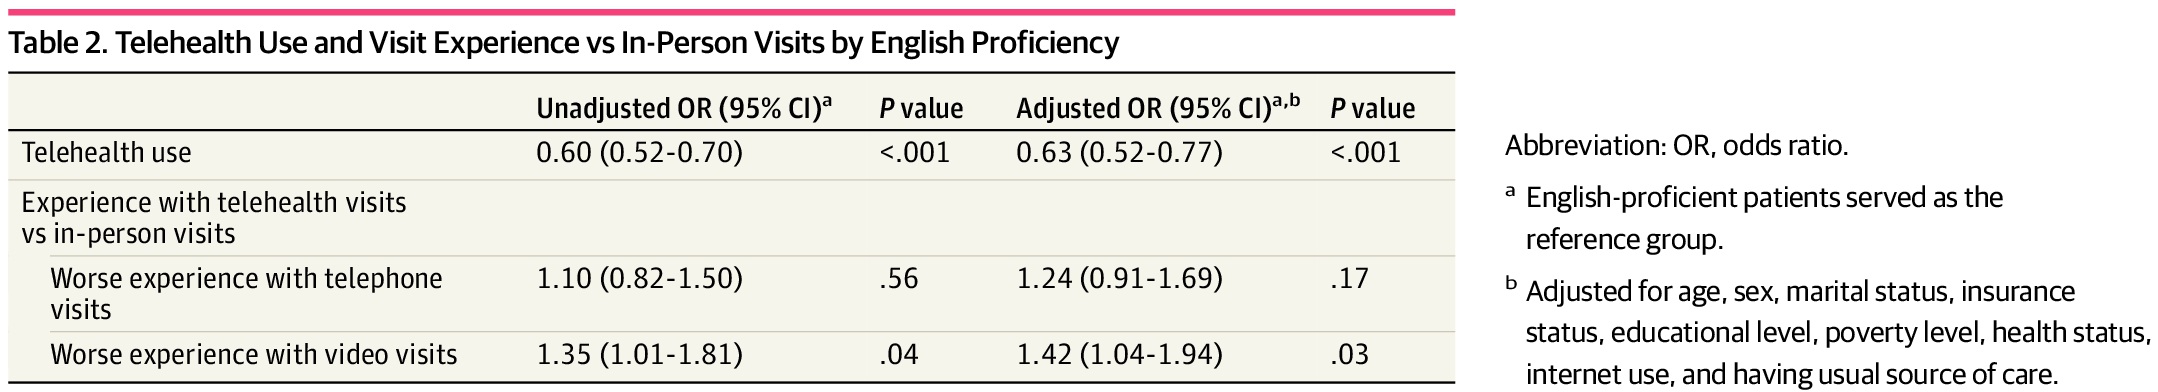 Telehealth Experience Among Patients With Limited English Proficiency